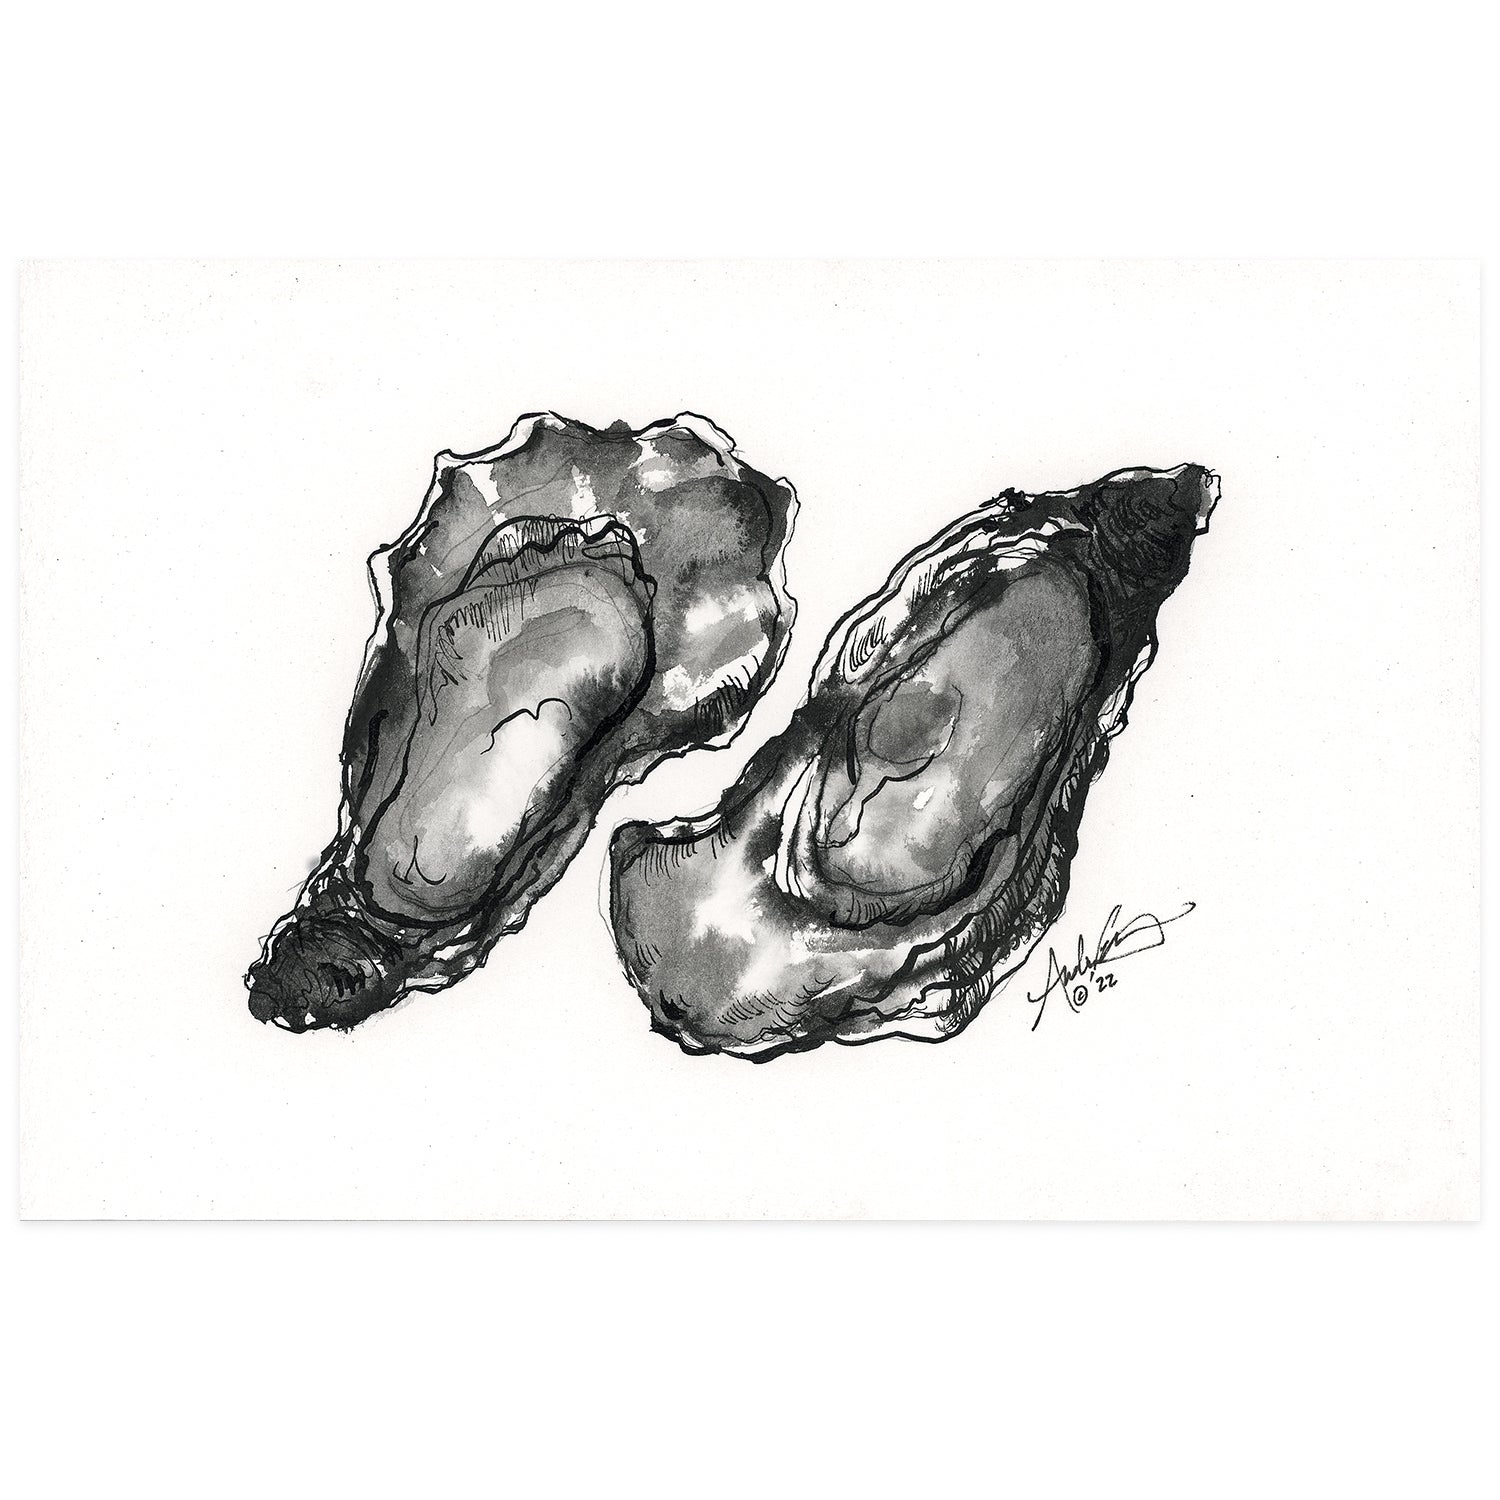 Pair of Oysters 2, 5x7” Original